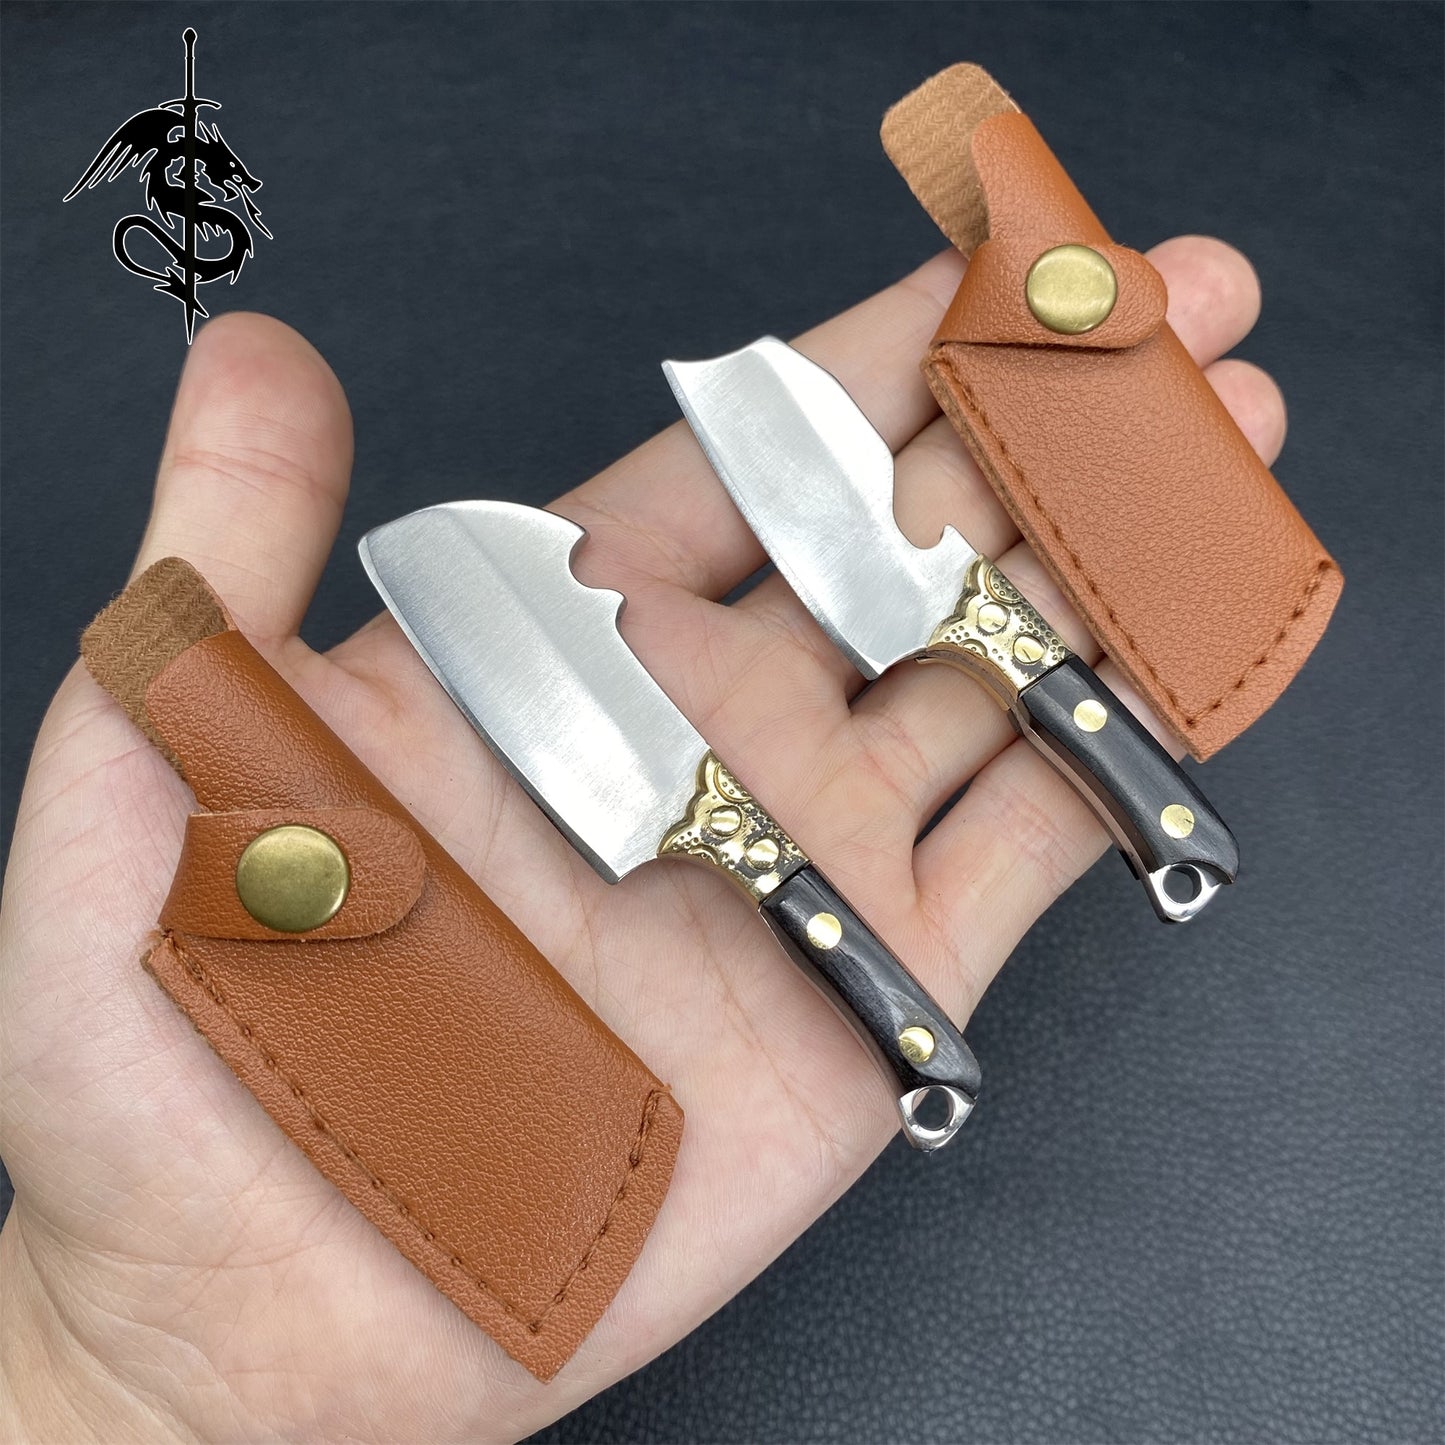 Brass And Wooden Handle Mini EDC Knife 2 In 1 Pack